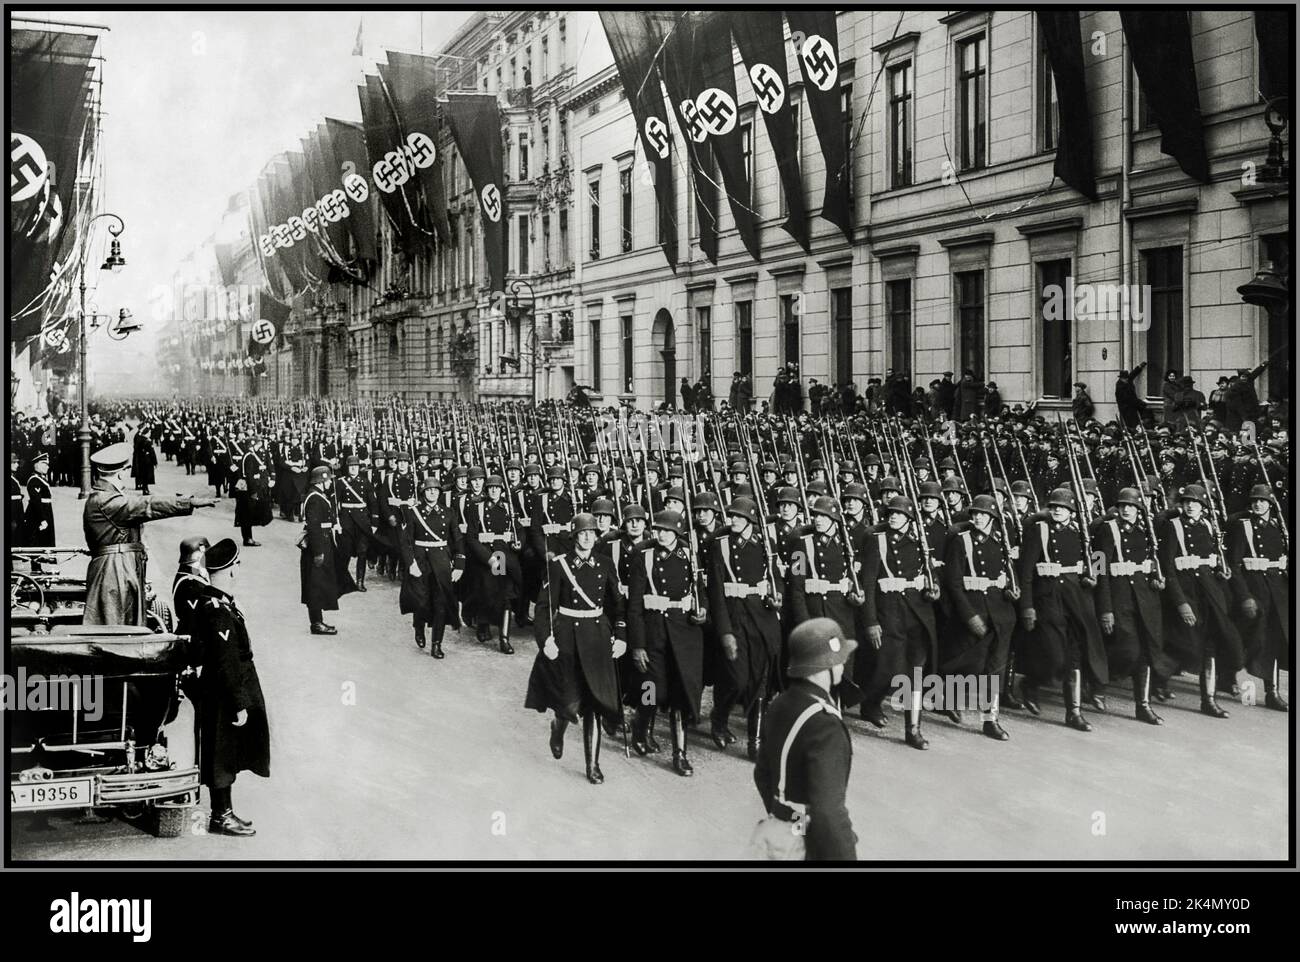 Leibstandarte Waffen SS  Adolf Hitler in his open top Mercedes Motorcar salutes a parade of his personal bodyguard regiment, the 1st SS Division Leibstandarte Waffen SS with buildings bedecked with swastika flags January 30th,1937 Stock Photo